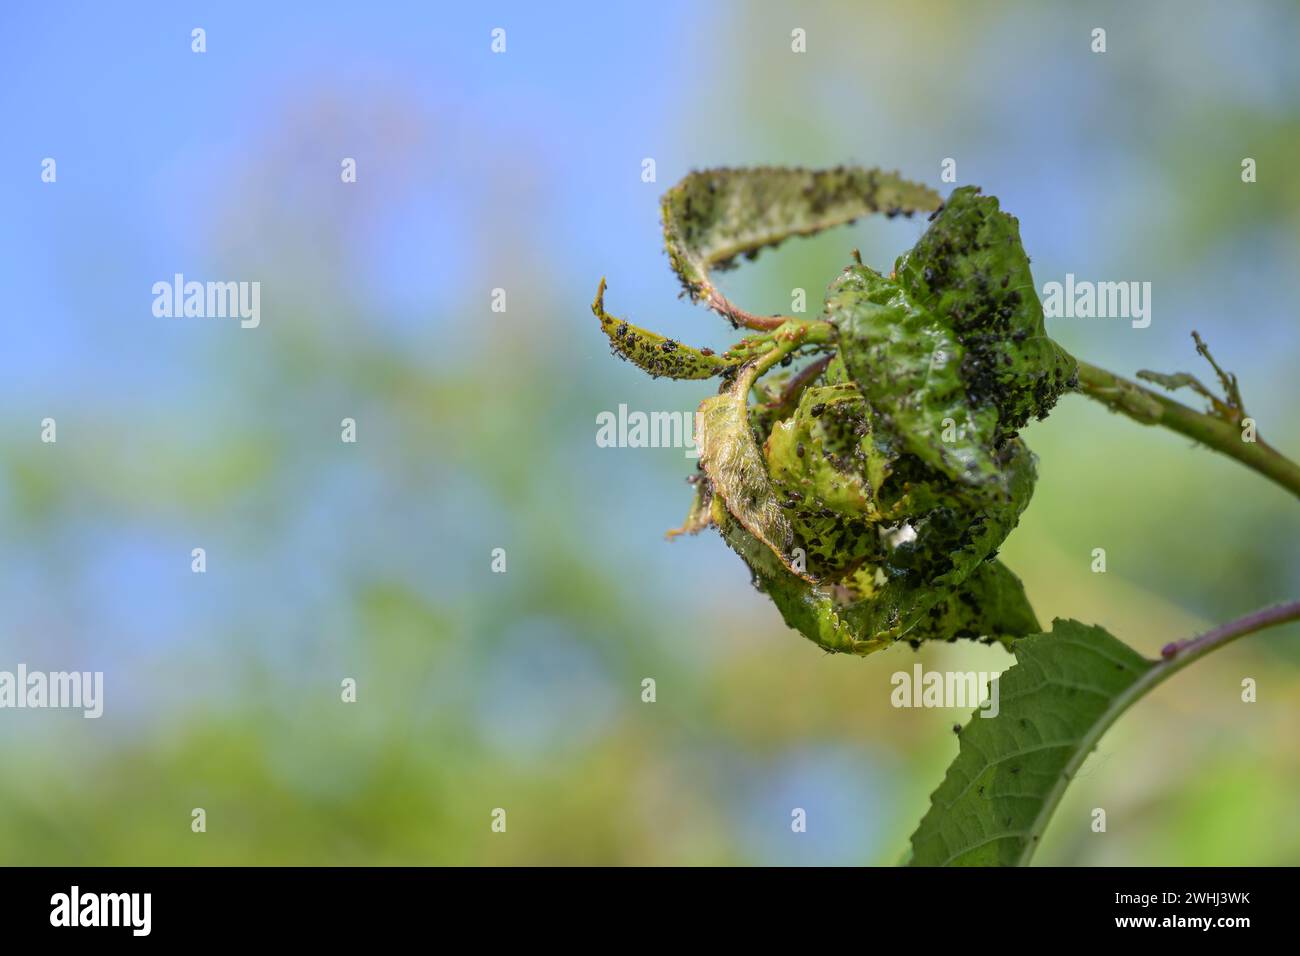 Deformed curled leaves full of black aphids on a weakened cherry tree in the orchard, agriculture concept for pests and diseases Stock Photo